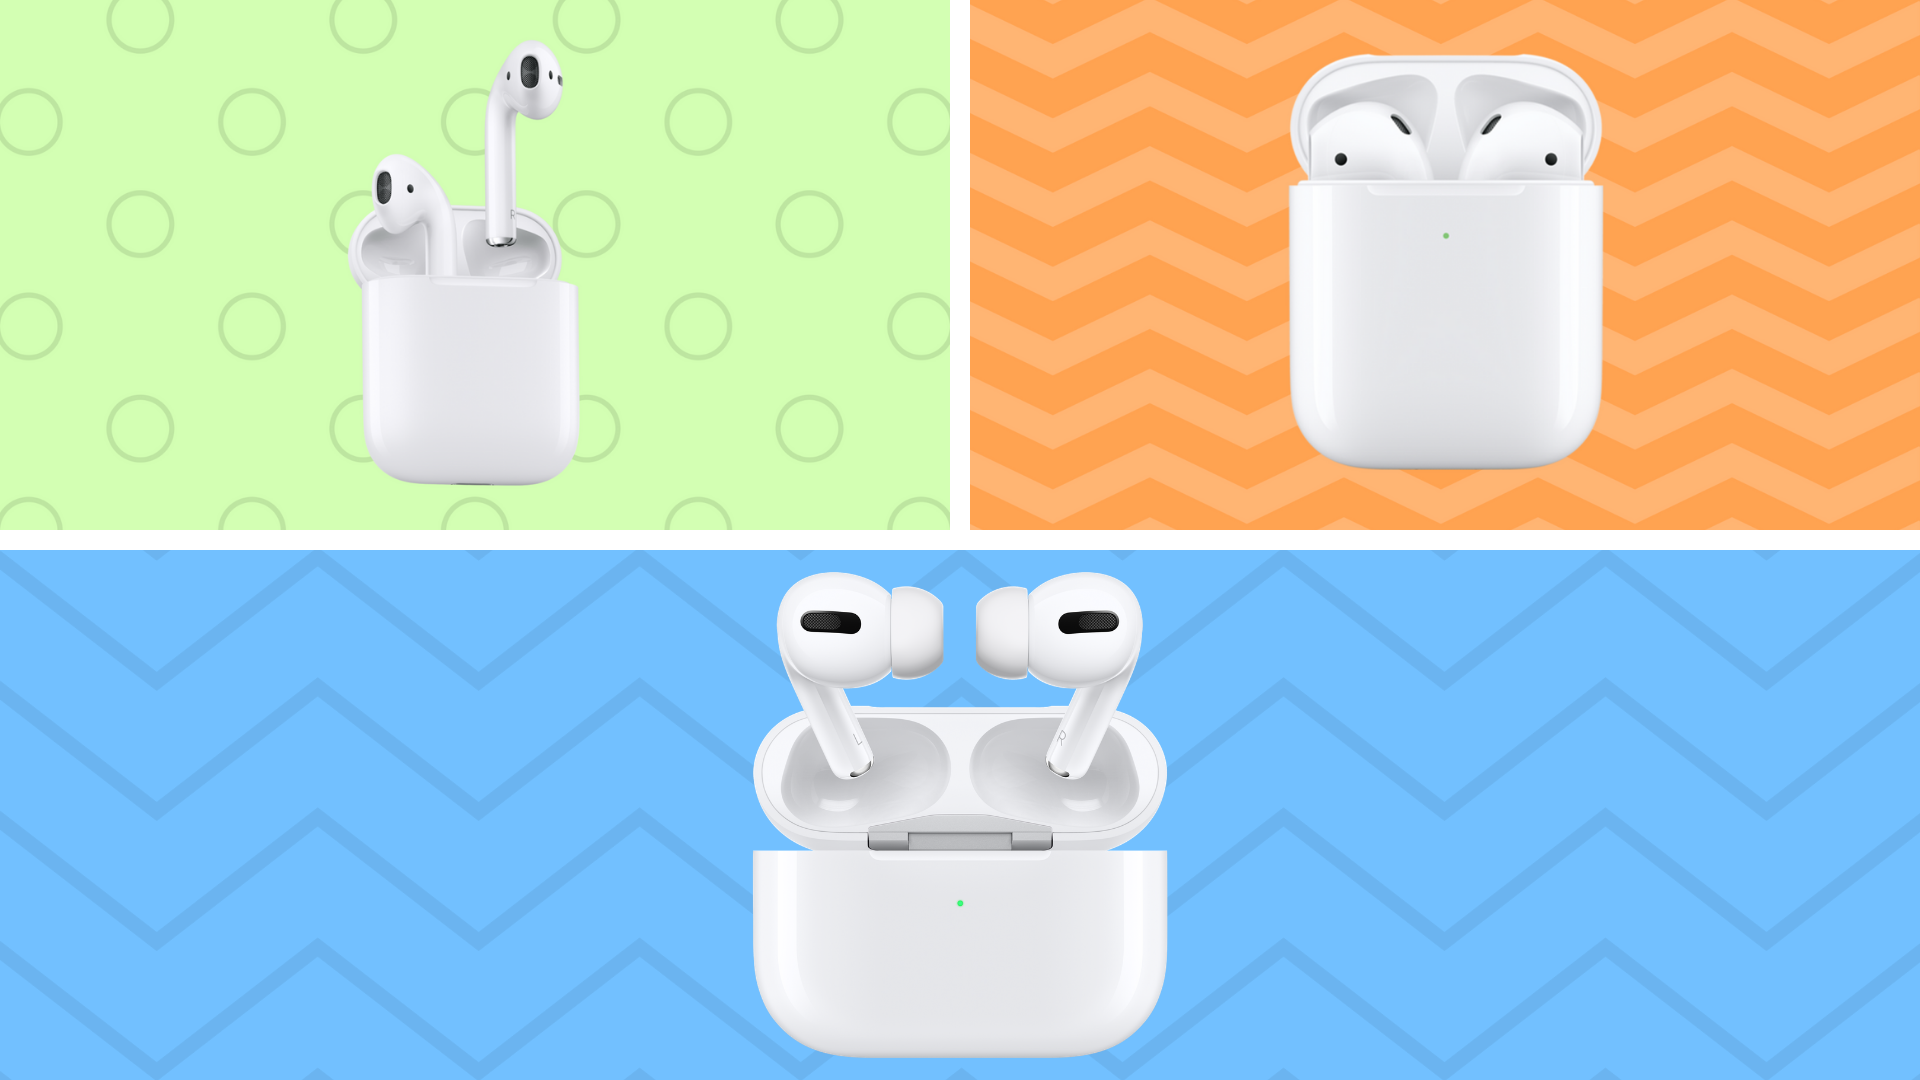 Apple AirPods and Apple AirPods Pro are on sale at Amazon